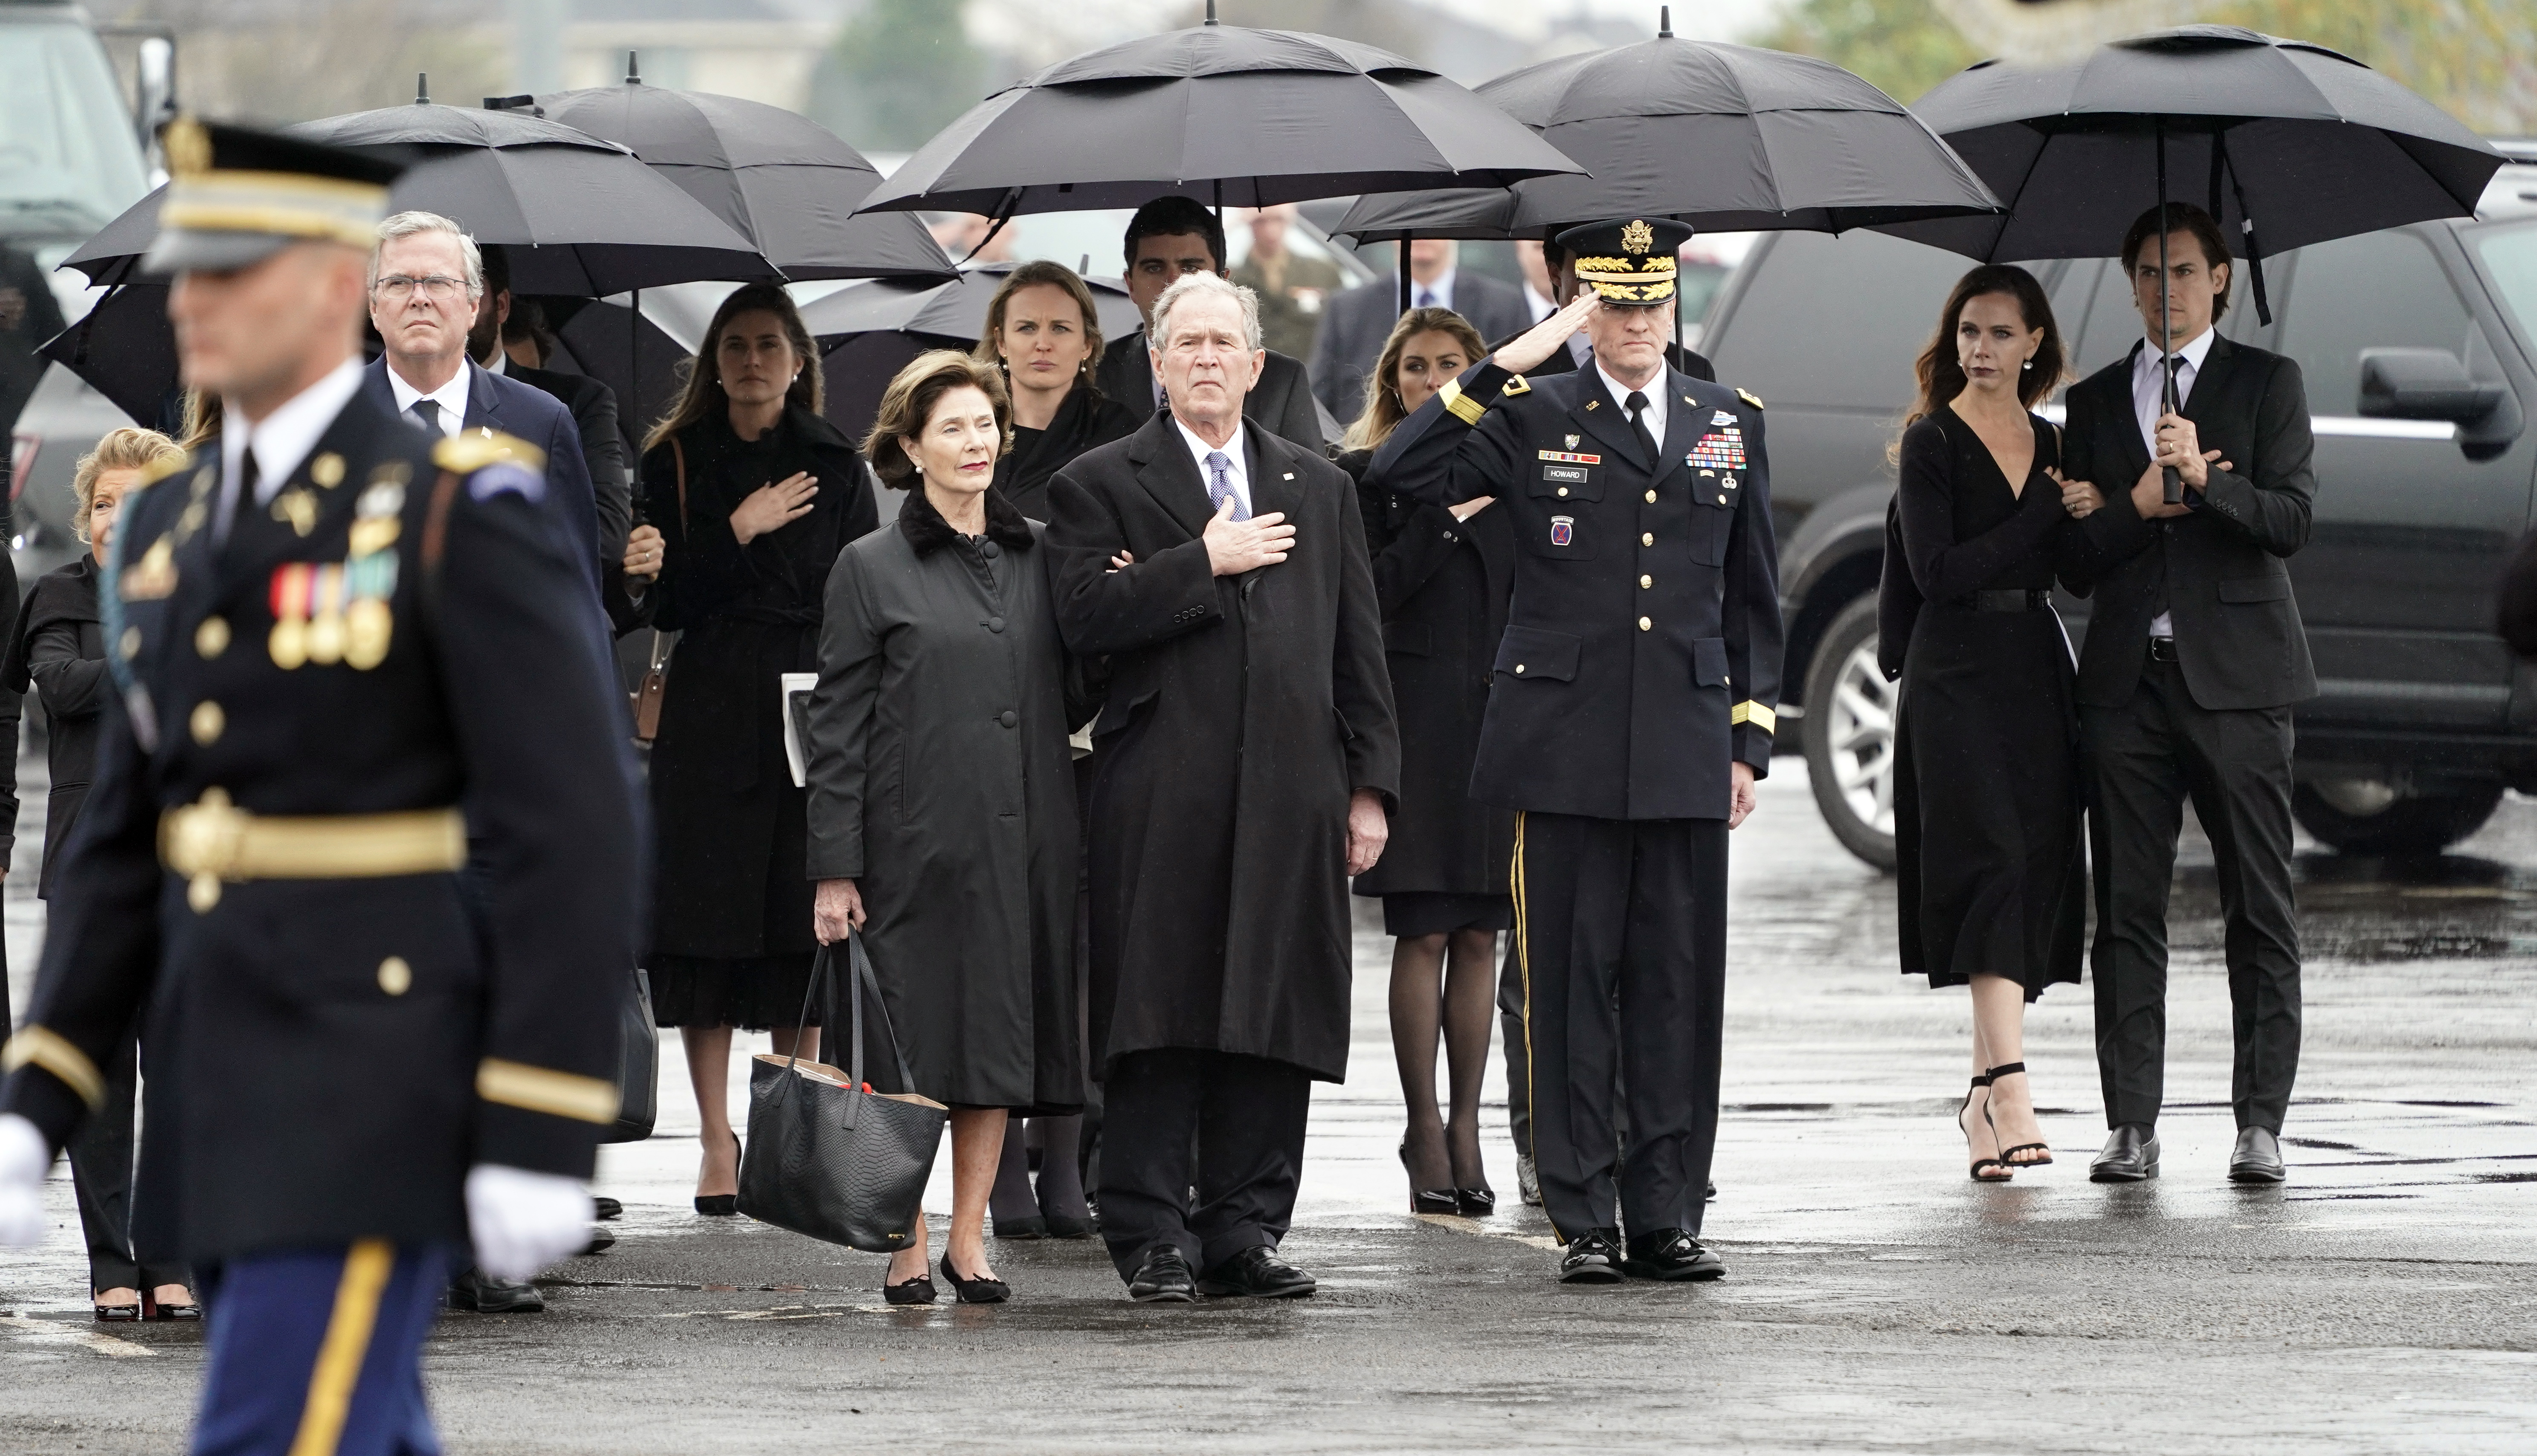 Former President George W. Bush, Laura Bush and other family members watch as the flag-draped casket of former President George H.W. Bush is carried by a joint services military honor guard on December 6, 2018 in Houston, Texas. (Photo by David J. Phillip-Pool/Getty Images)